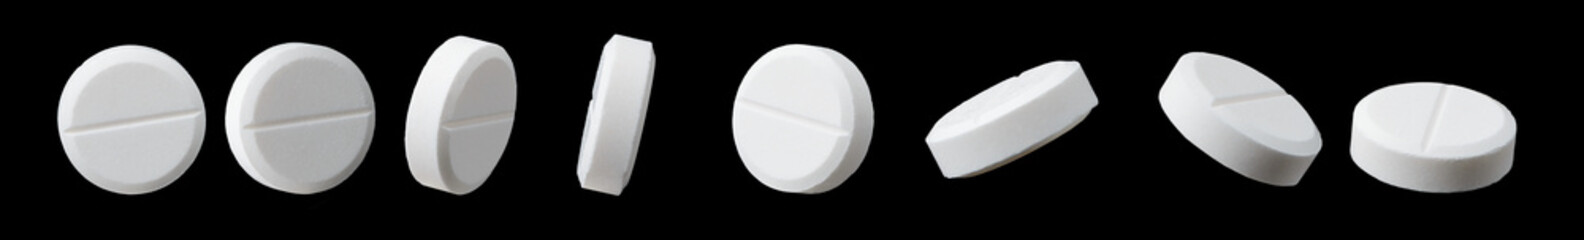 Different angles of white pill